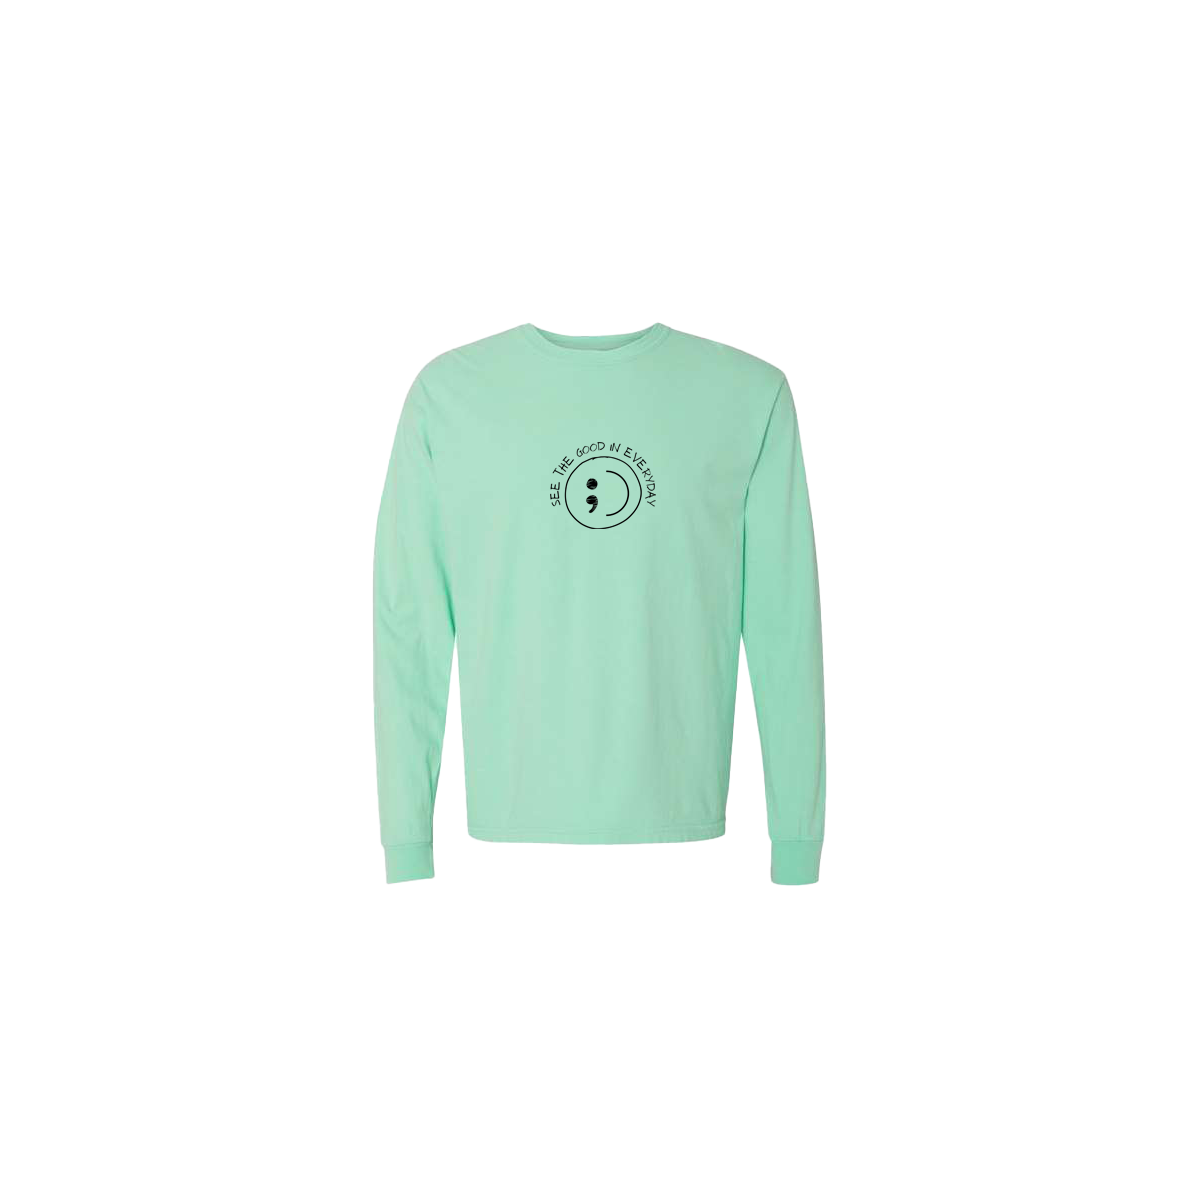 See the Good in Everyday Smiley Embroidered Mint Long Sleeve Tshirt - Mental Health Awareness Clothing